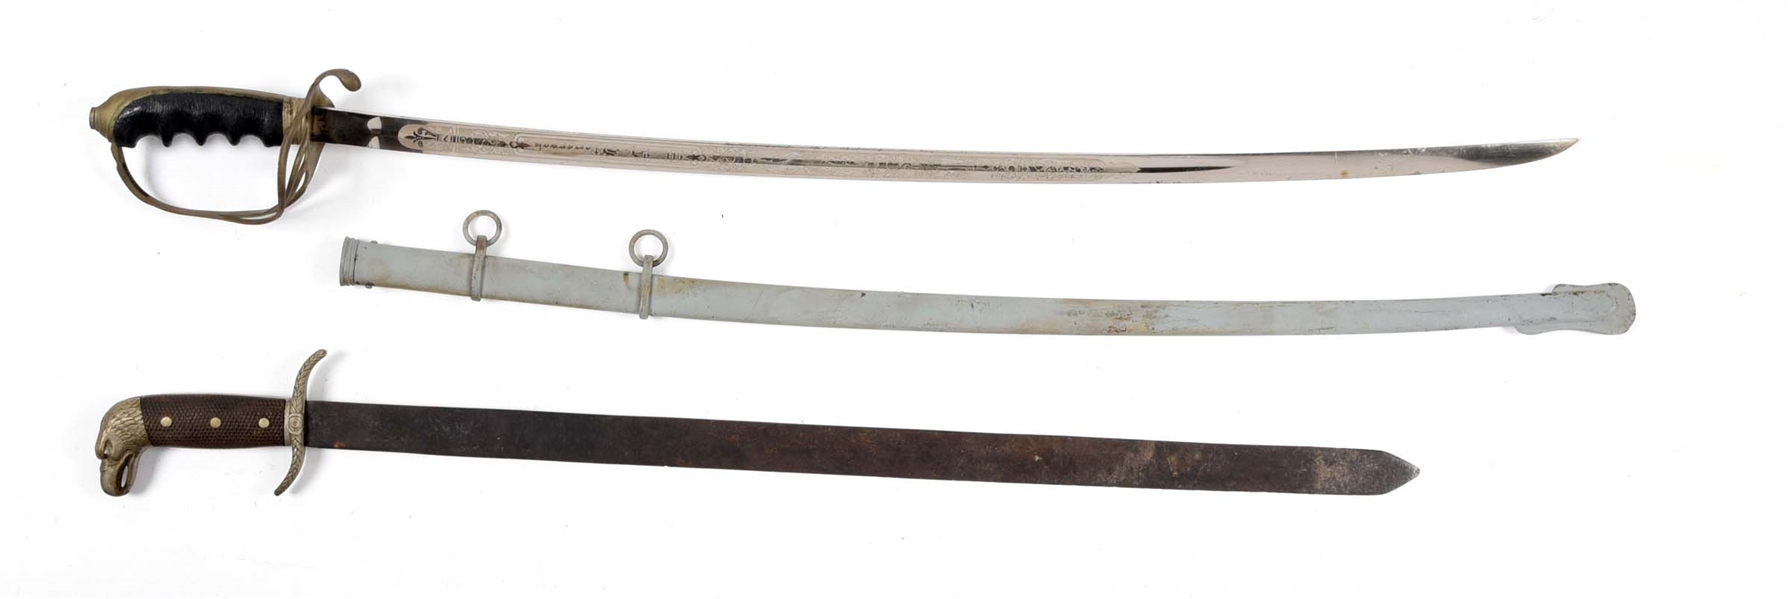 LOT OF 2: US M1902 OFFICERS SWORD AND COLLINS EAGLE HEAD MACHETE.